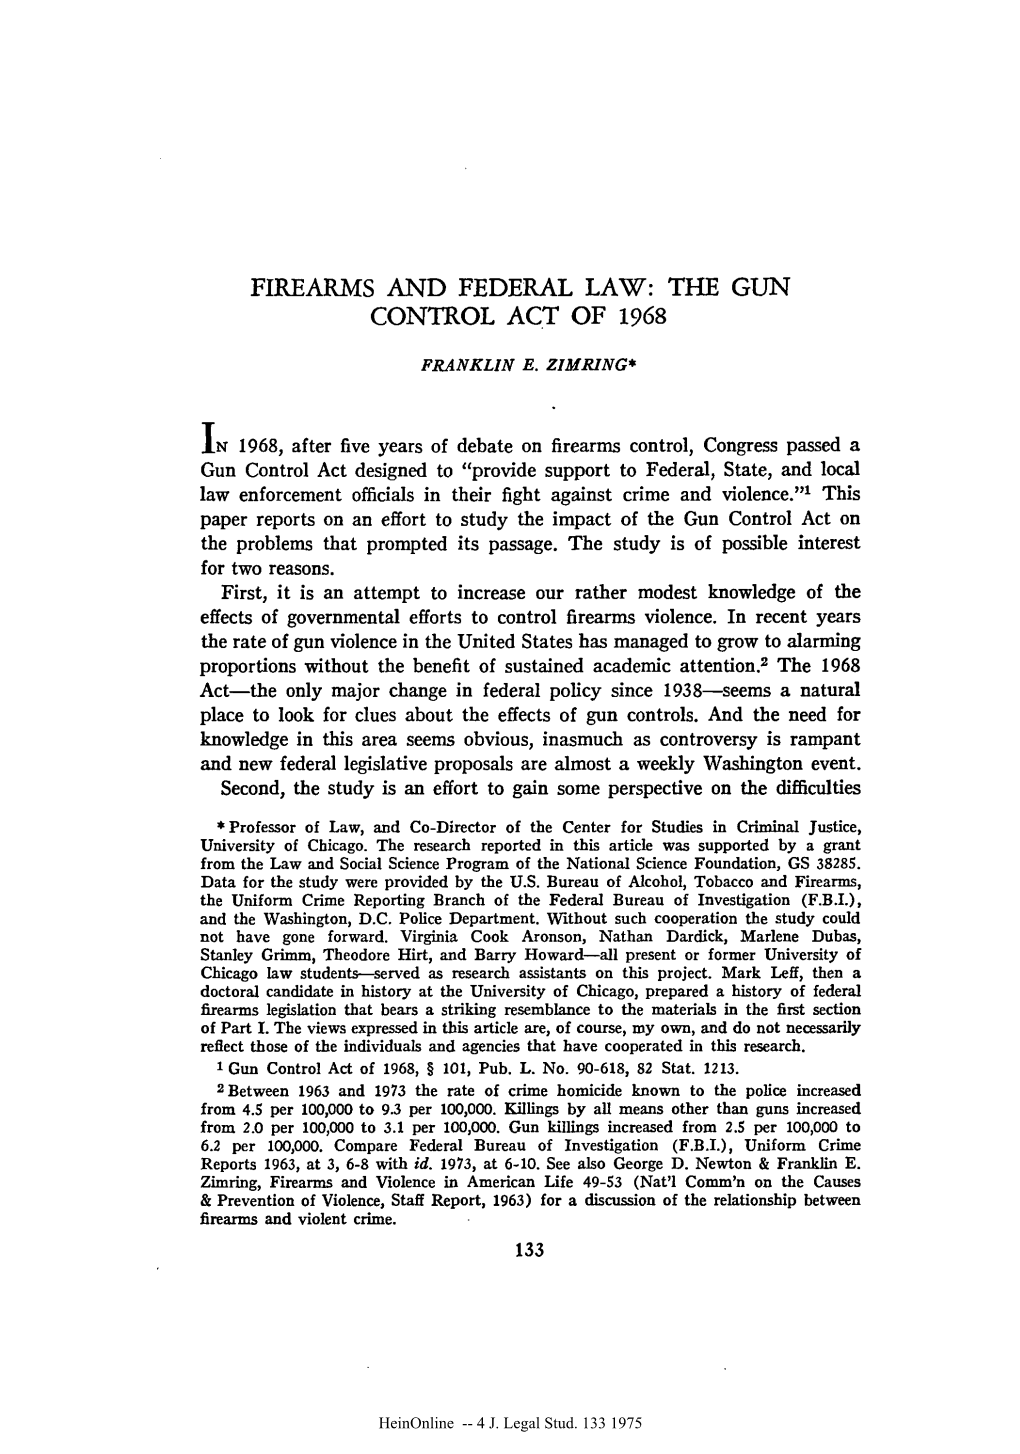 Firearms and Federal Law: the Gun Control Act of 1968